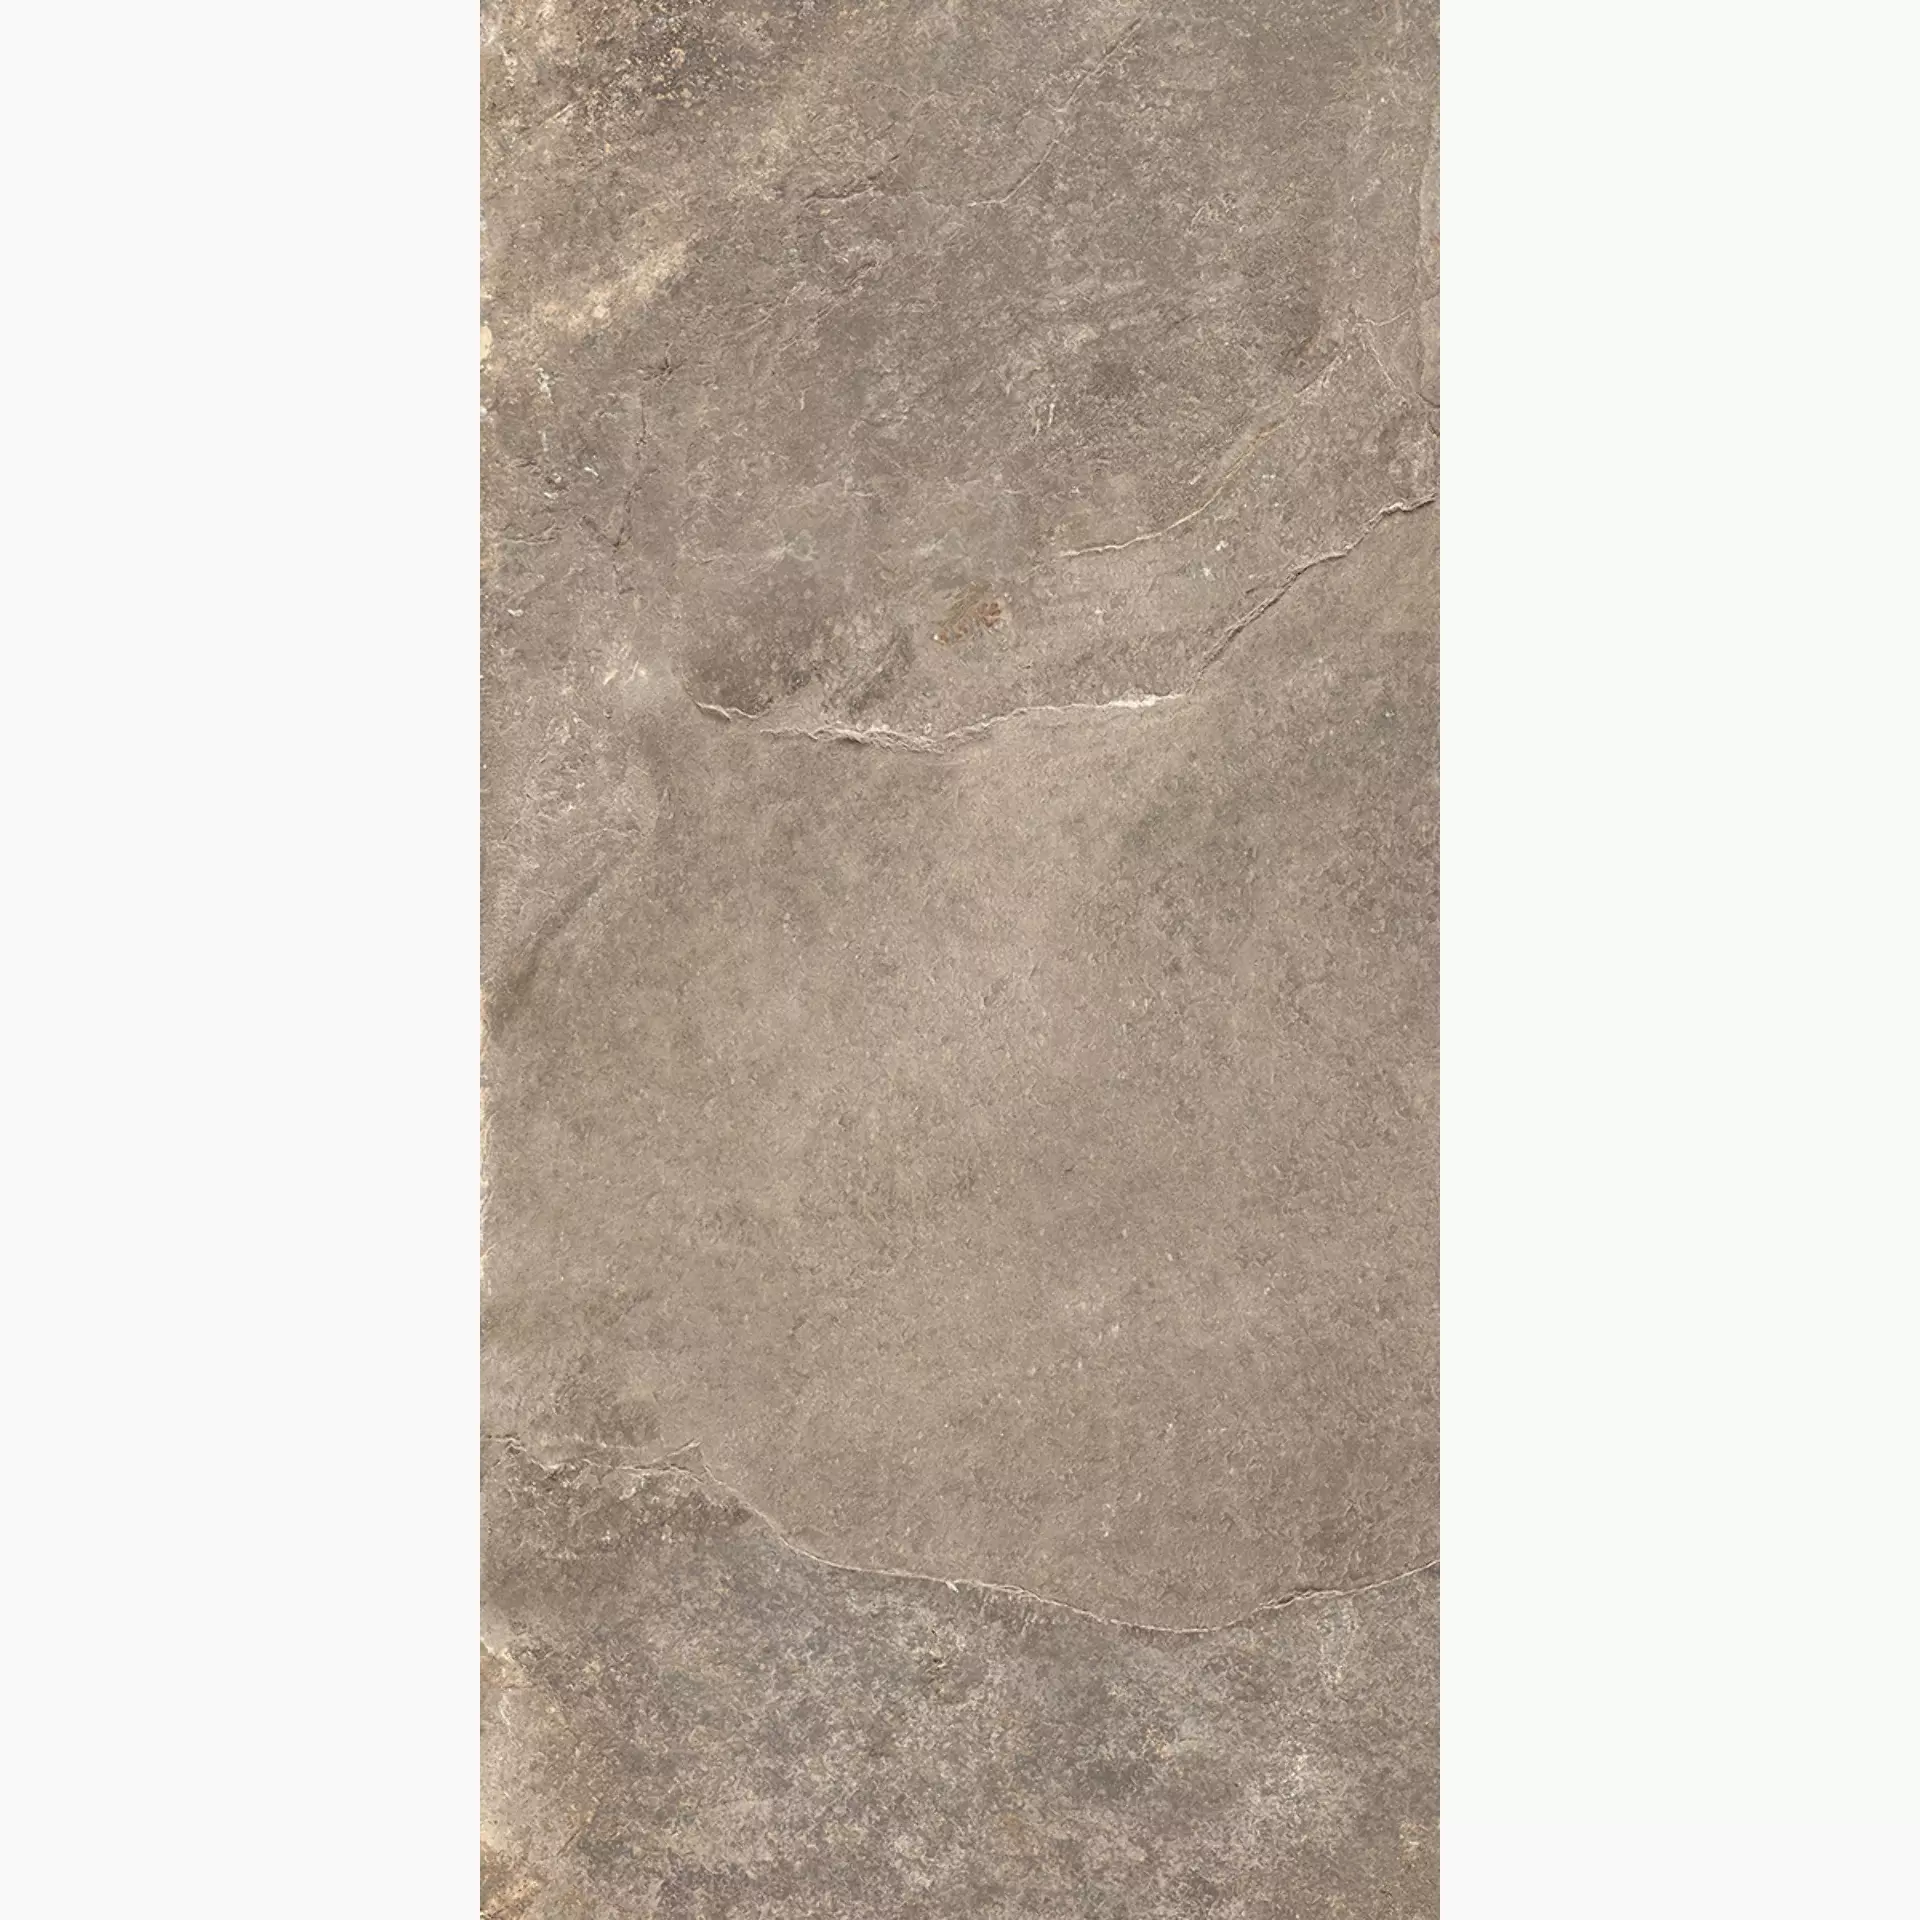 Rondine Ardesie Taupe Naturale J87004 30x60cm rectified 9,5mm